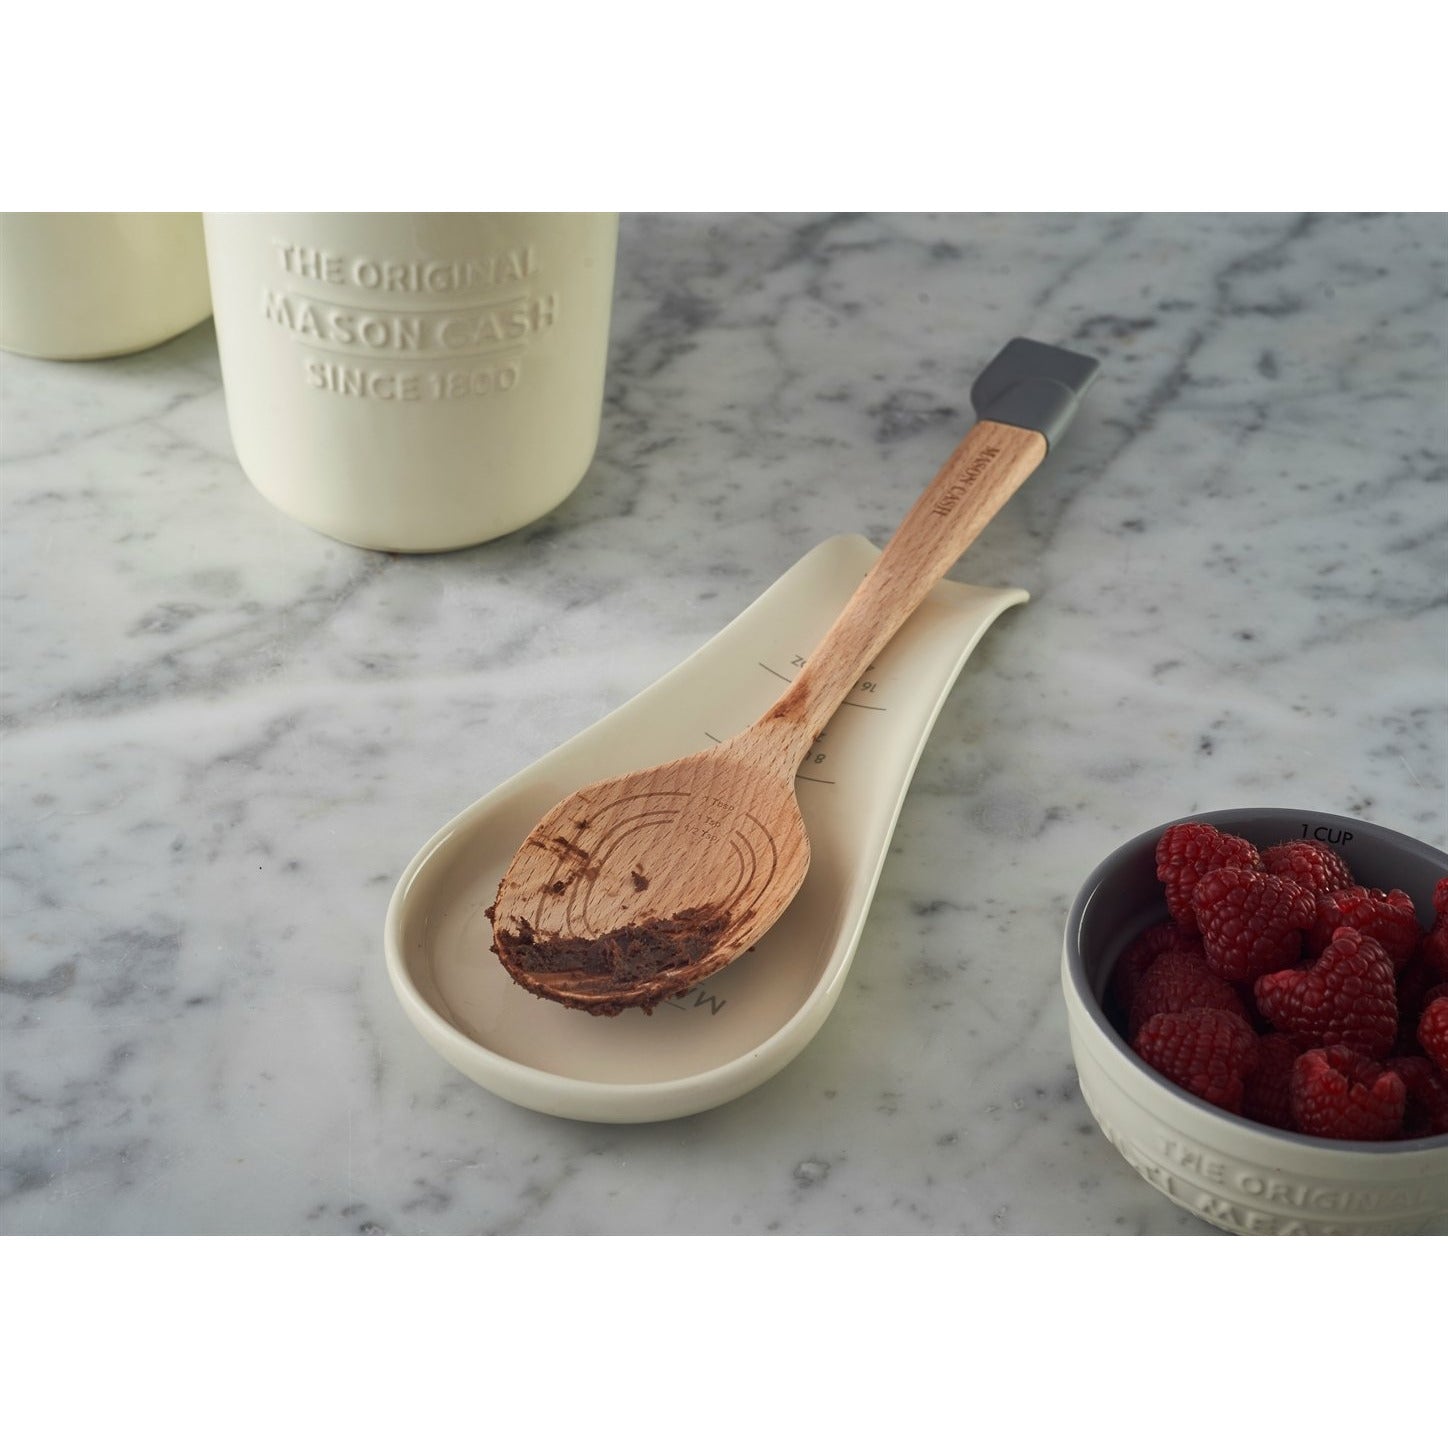 White Ceramic Dog Themed Kitchen Utensils: Measuring Cups and Spoons, Spoon  Rest for Countertop - Cute Kitchen Accessories (Dog Measuring Spoons)